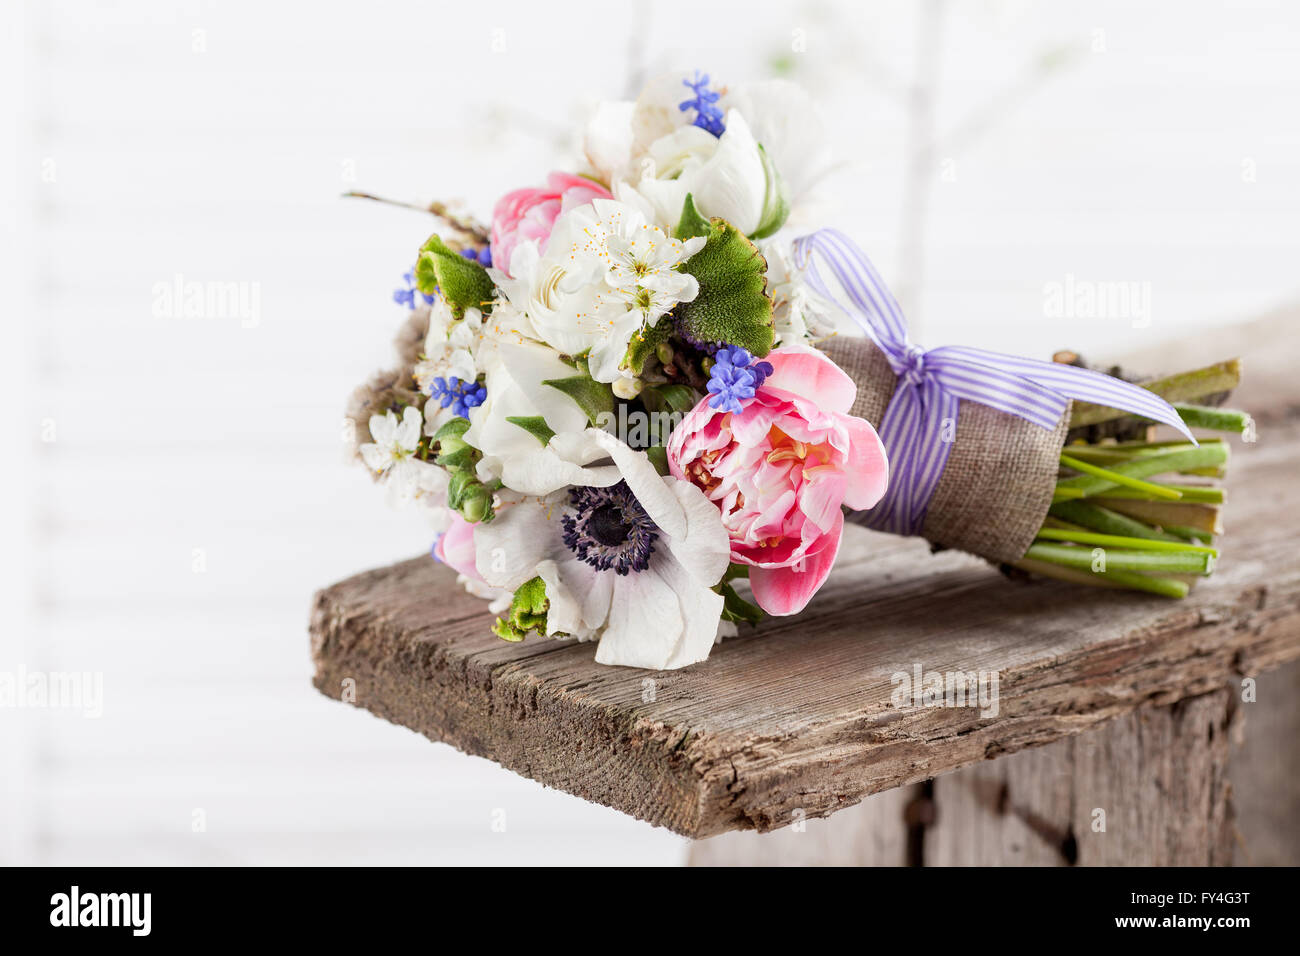 Bouquet from pink tulips, violet grape hyacinths, white anemones, violet veronica and white buttercups Stock Photo